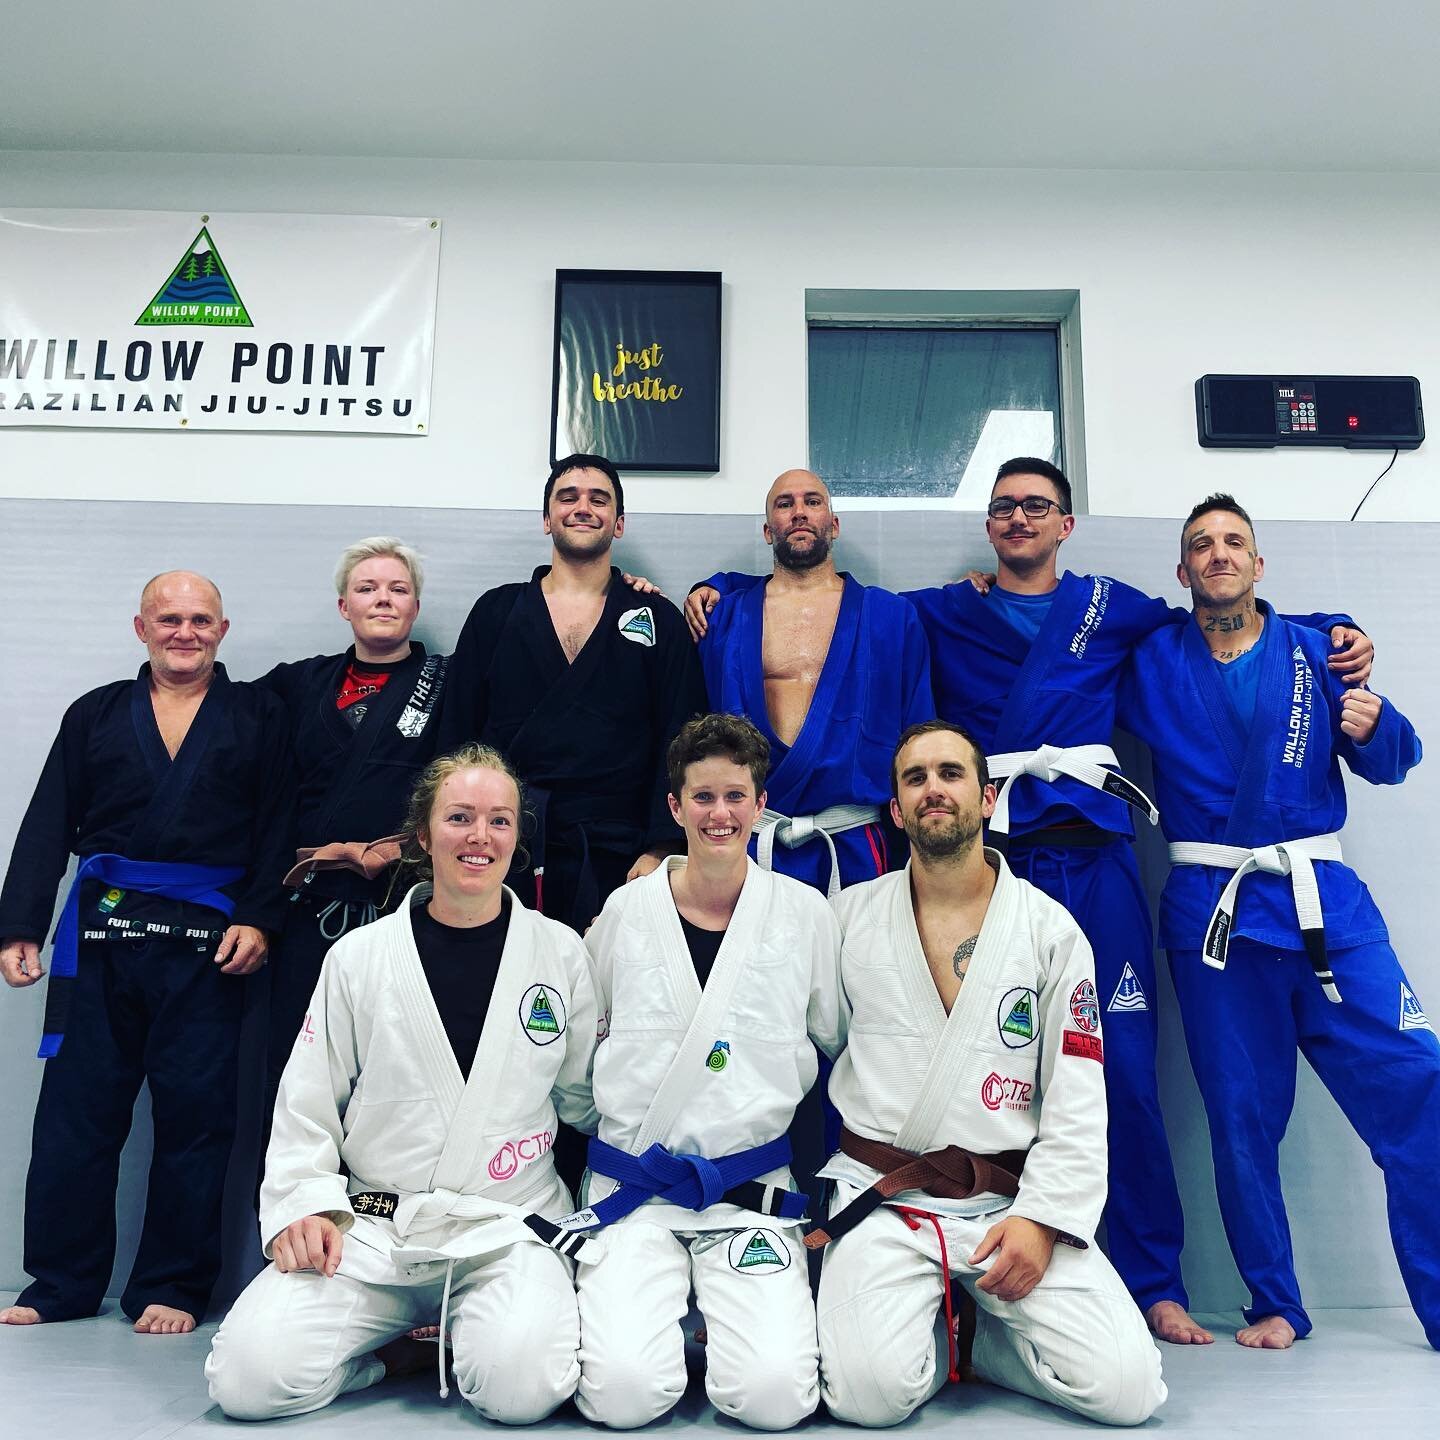 Another great week of training capped off with a gruelling competition class👏🏼💦 Thank you guys for leaving it all out on the mats tonight and really pushing yourselves👍🏼❤️
.
@sarezack @zackzachariasbjj @phil.tatau.canada @dustin.fredy @david.kol